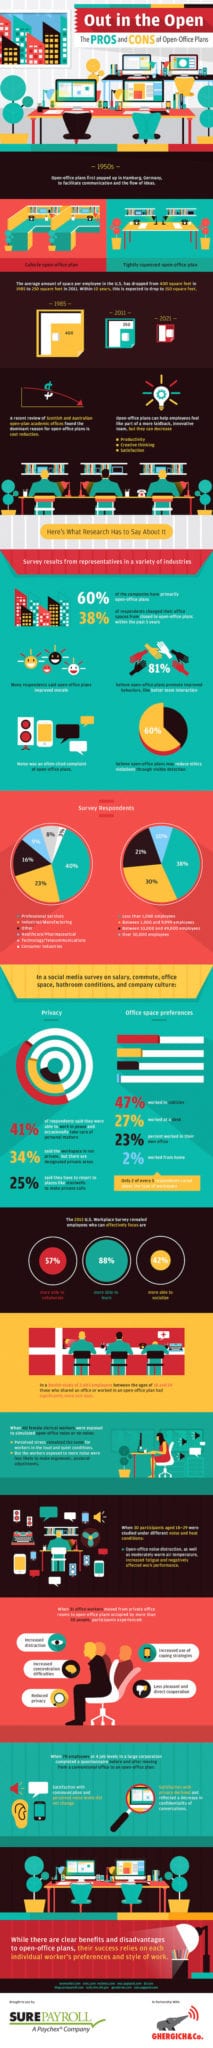 The Pros and Cons of Open-Office Plans [Infographic]